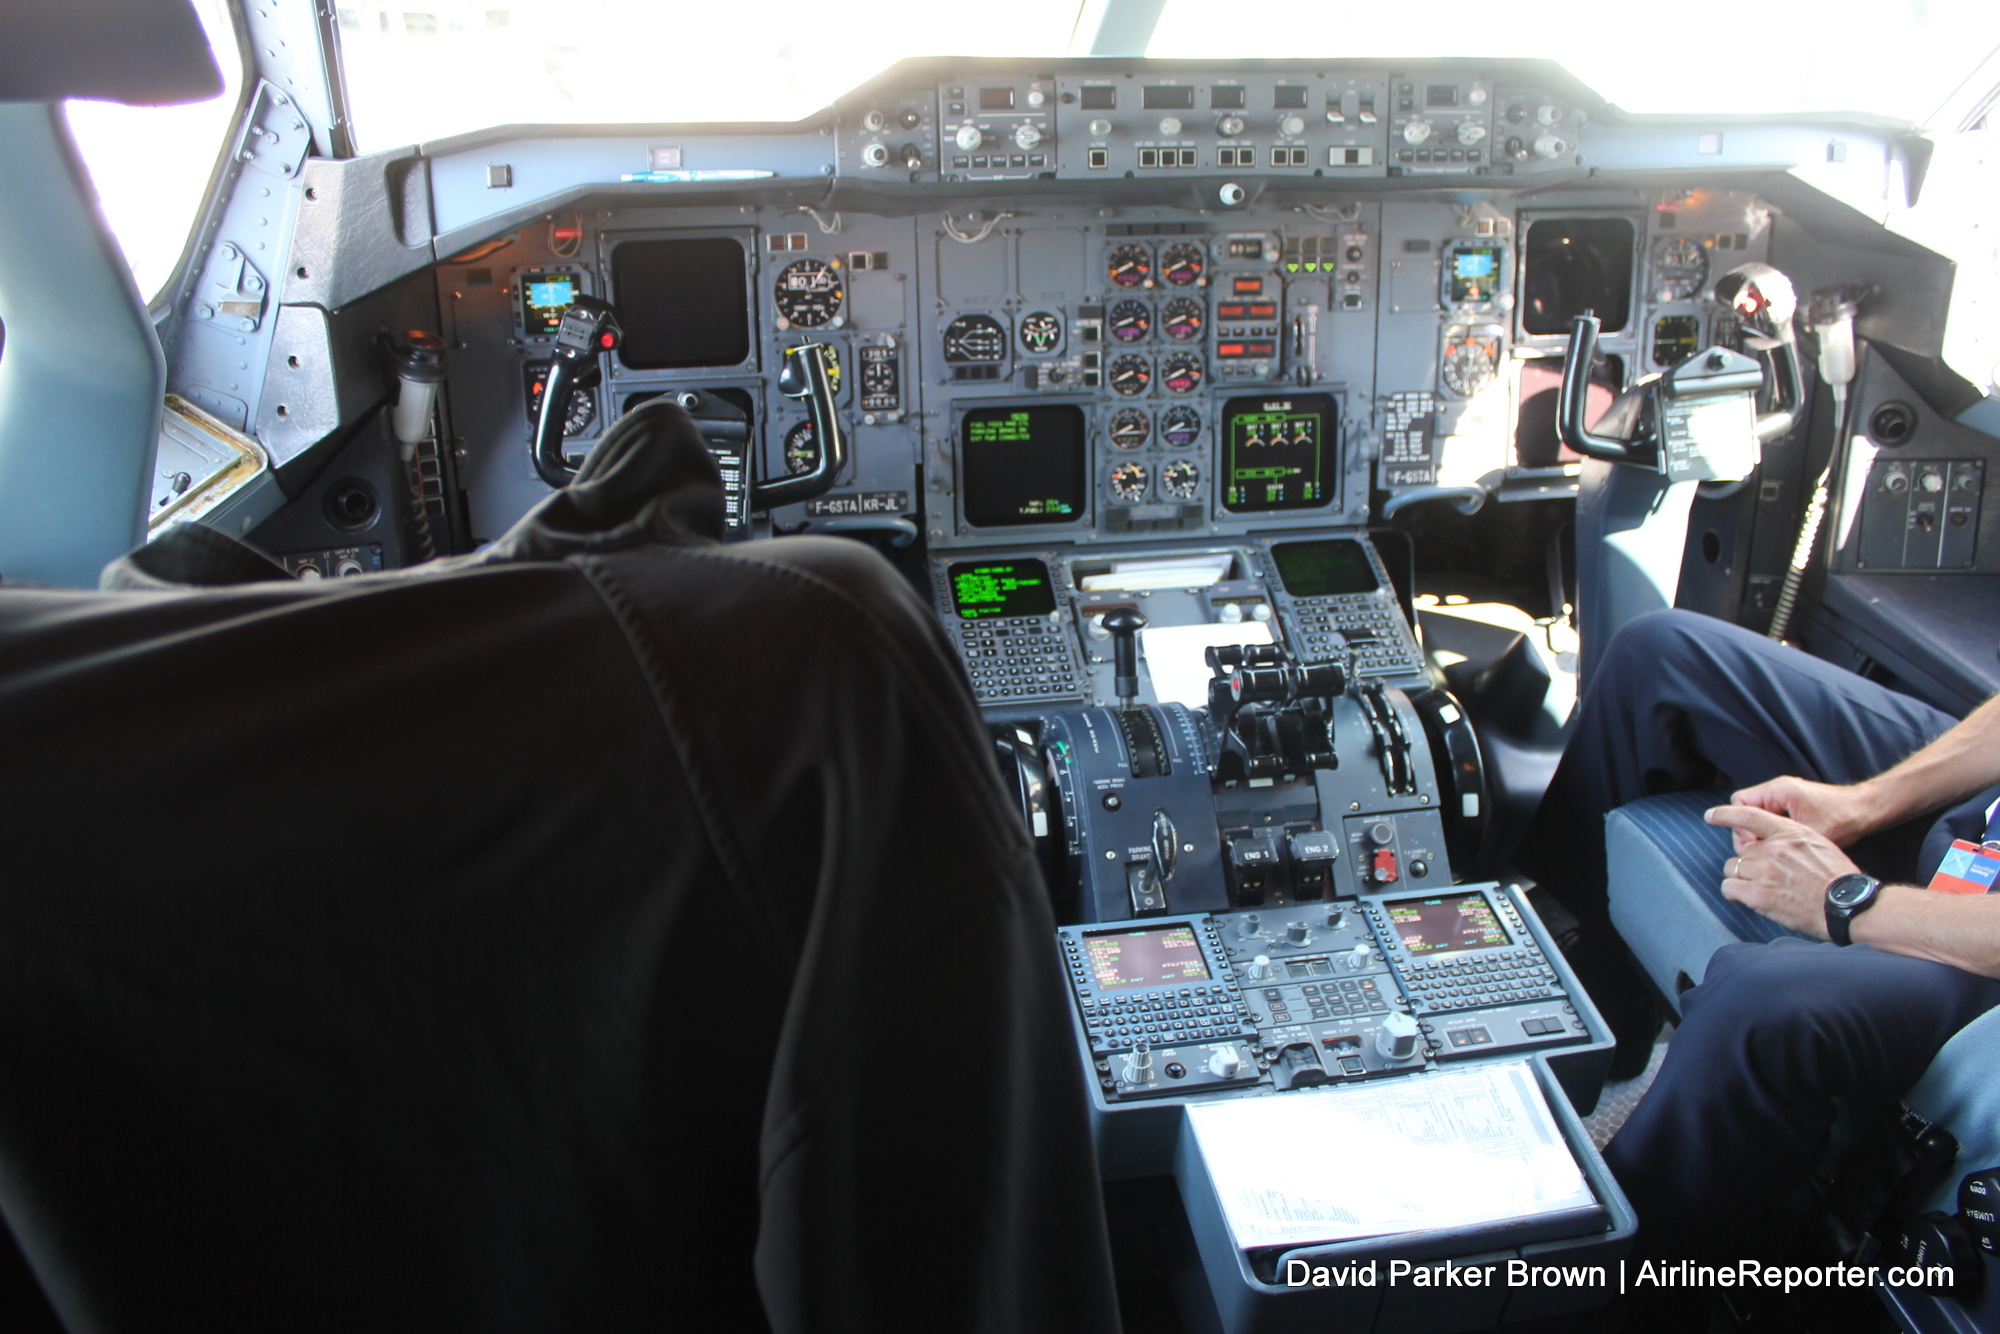 The flight deck of the A300-600ST.